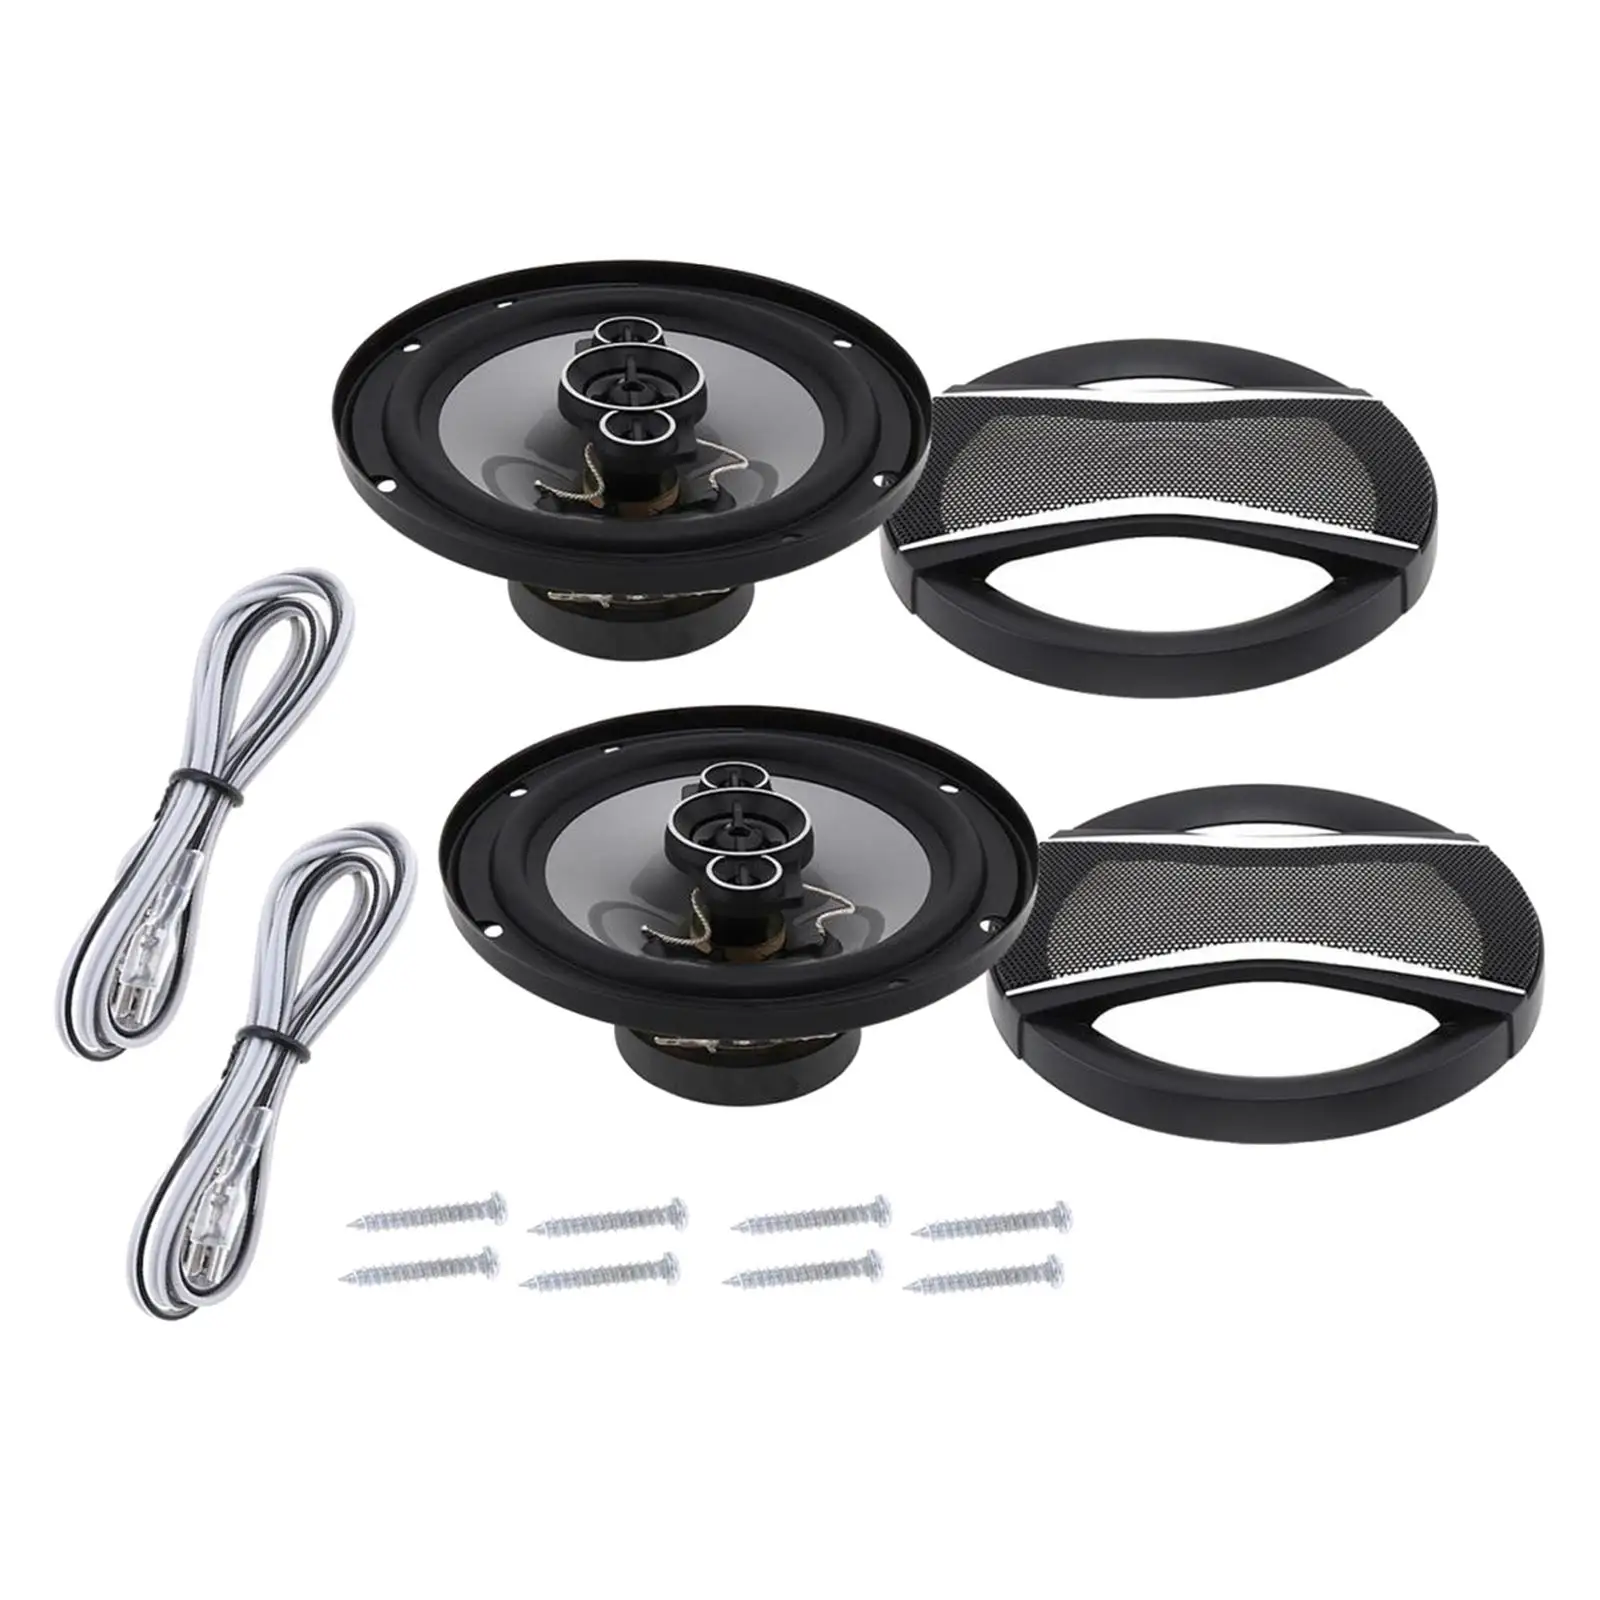 Car HiFi Coaxial Speaker Stereo Spare Parts Vehicle Speaker for Car Driving Vehicle